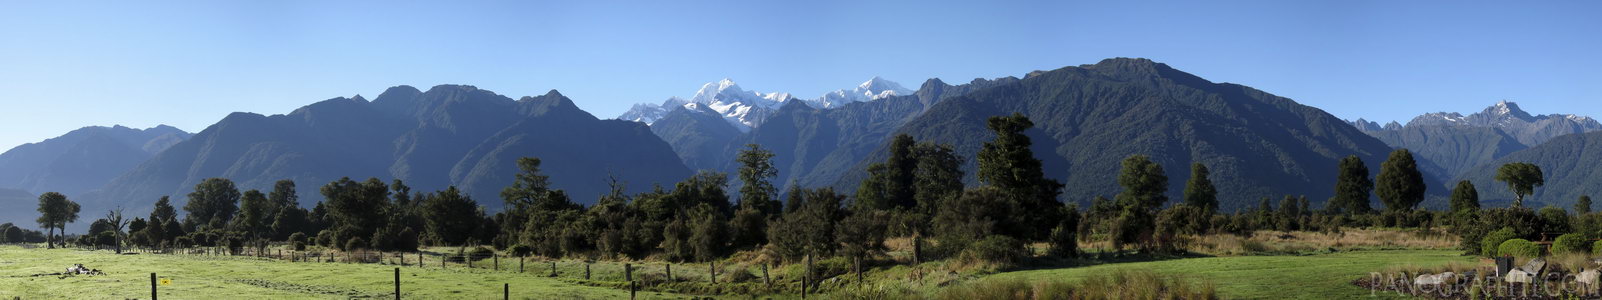 Mount Cook Near Lake Matheson - View of Mount Cook south east from a cafe near Lake Matherson